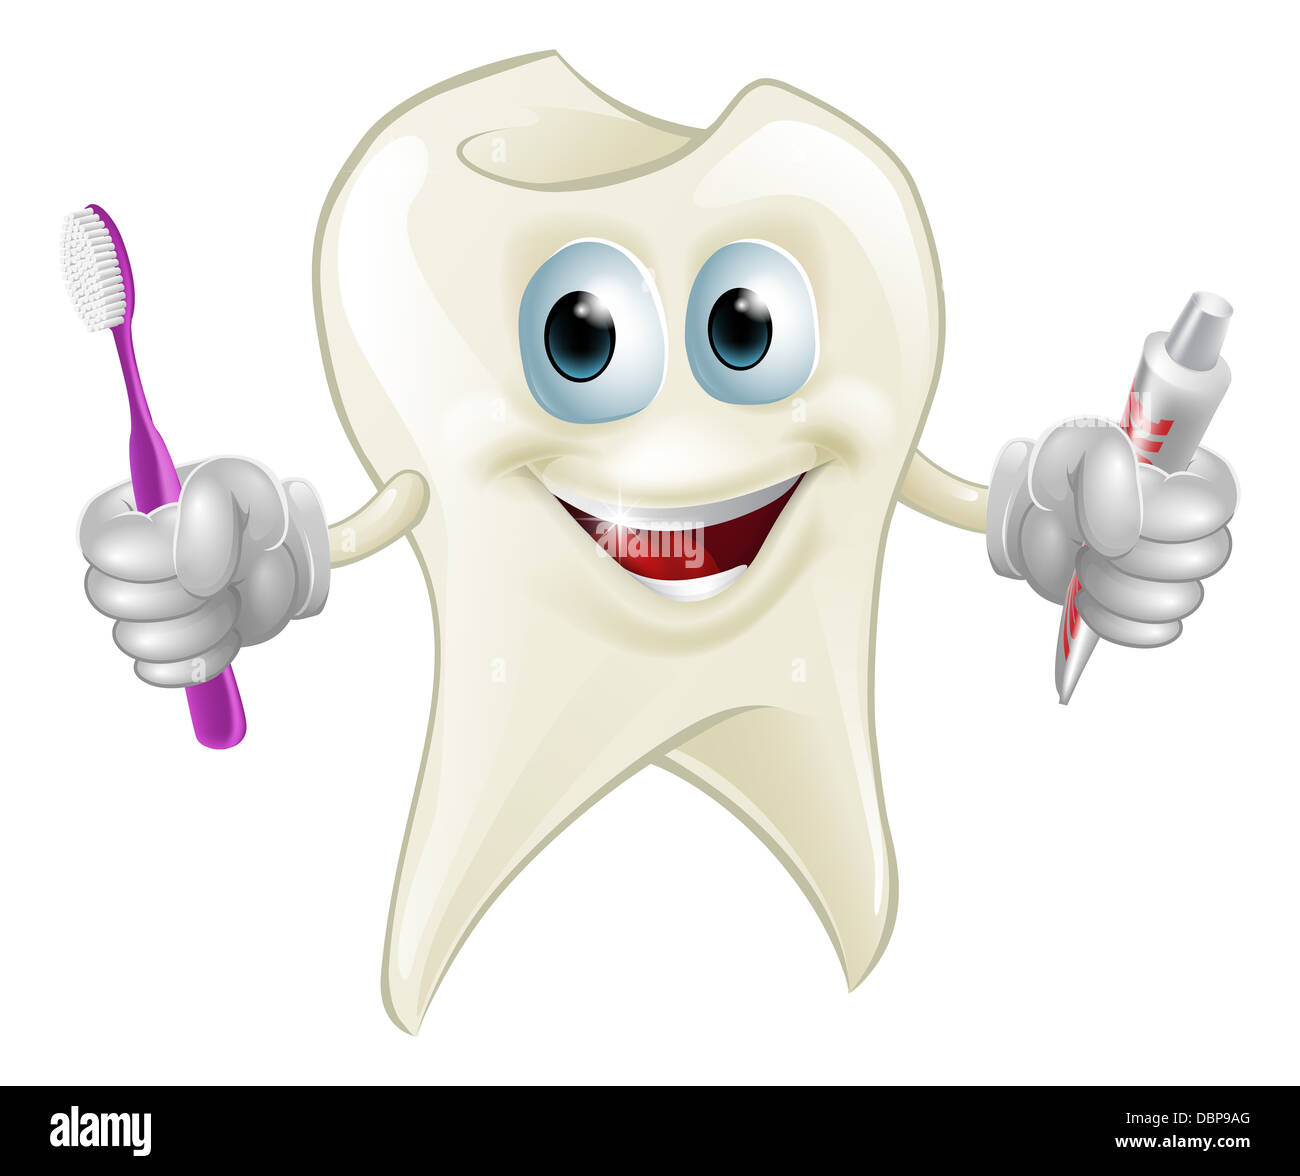 An illustration of a cartoon tooth man character mascot holding a toothbrush and tube of toothpaste Stock Photo